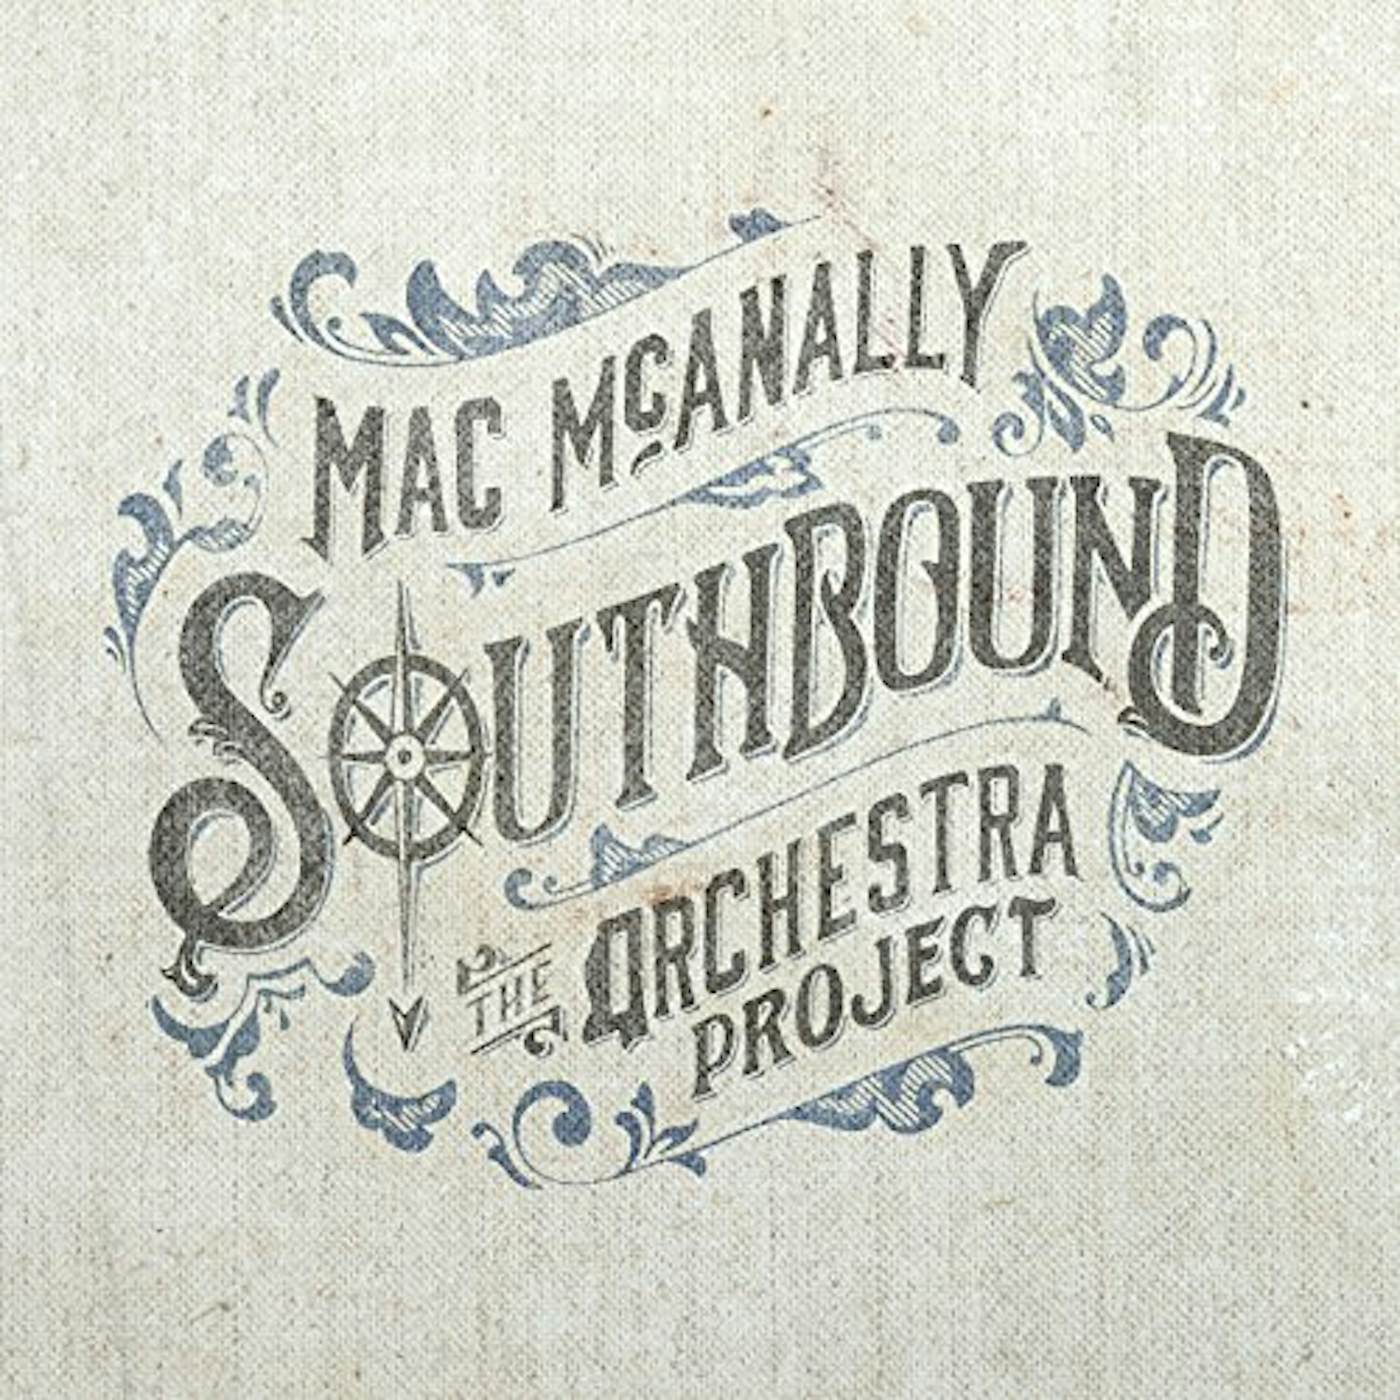 Mac McAnally SOUTHBOUND: THE ORCHESTRA PROJECT CD